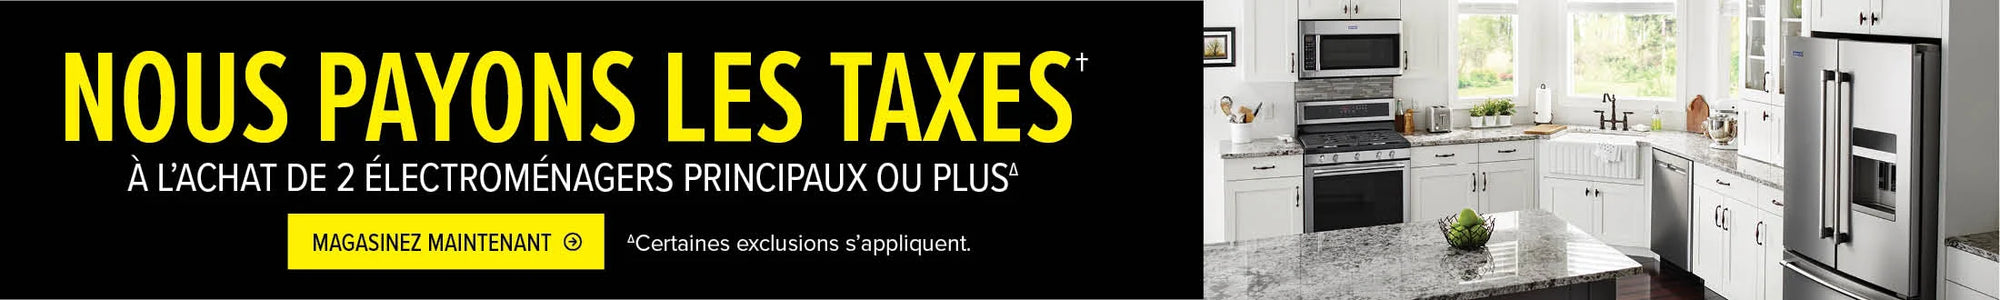 We pay the taxes when you buy 2 or more on major appliances. Shop now.